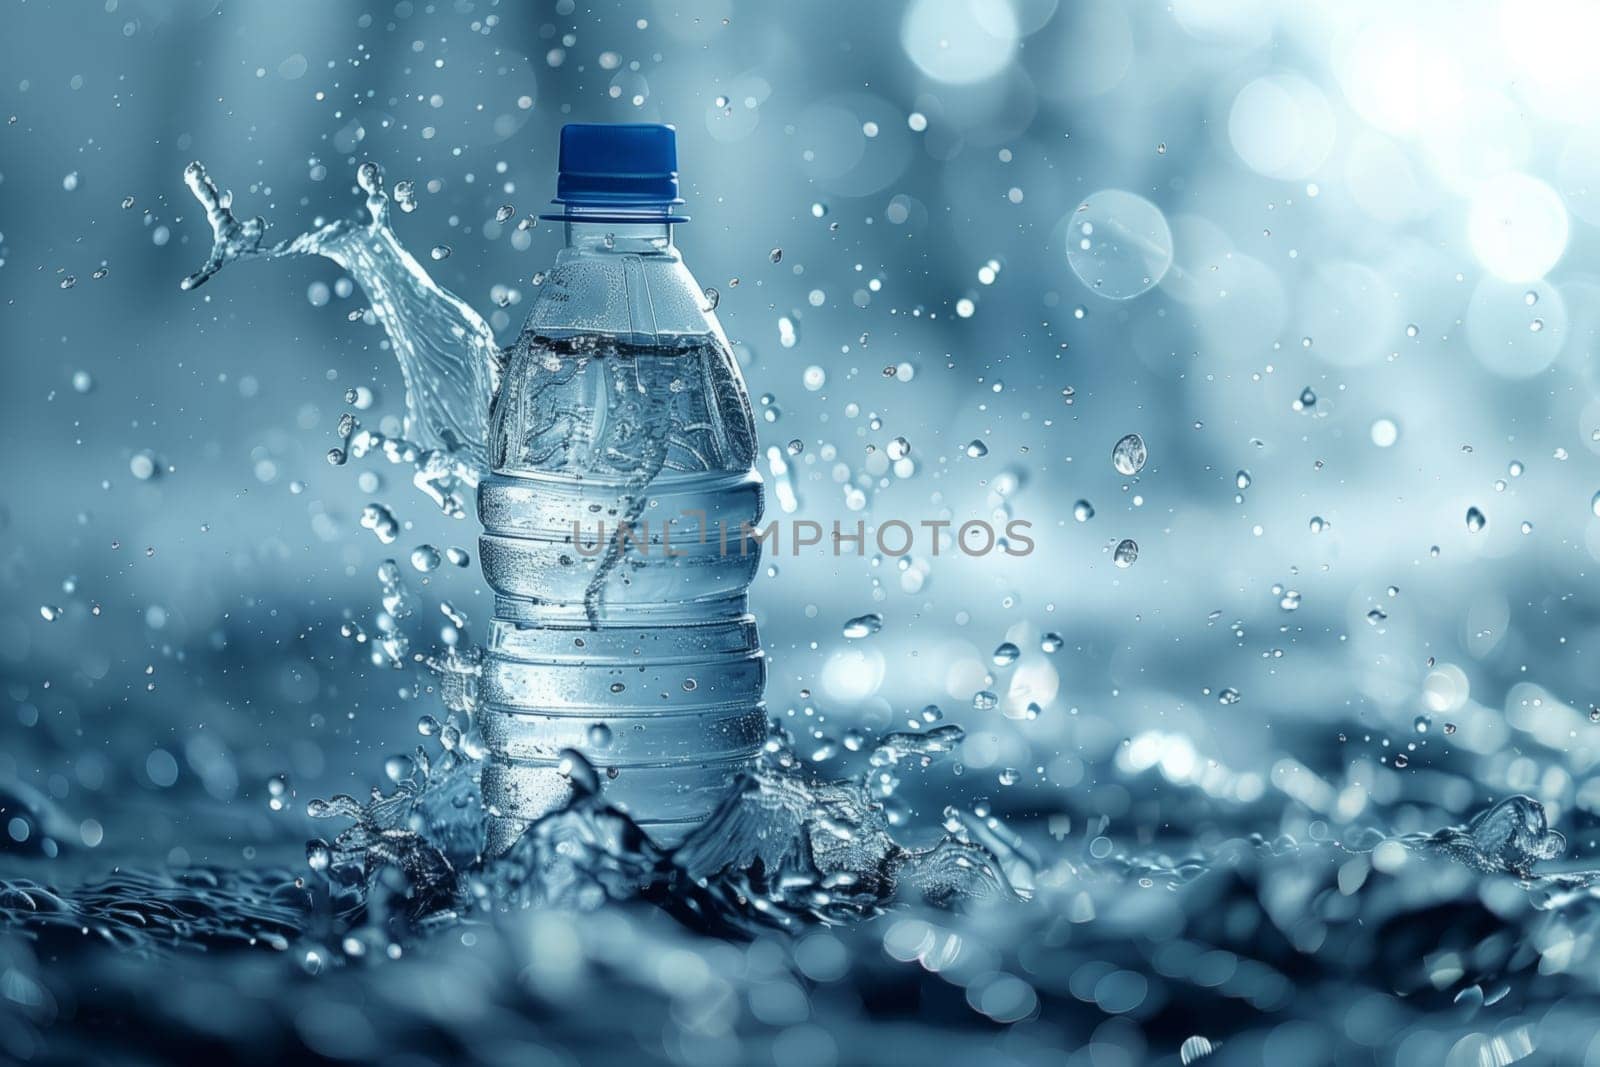 Drinking water splashes on the ground, creating a fluid atmosphere by richwolf